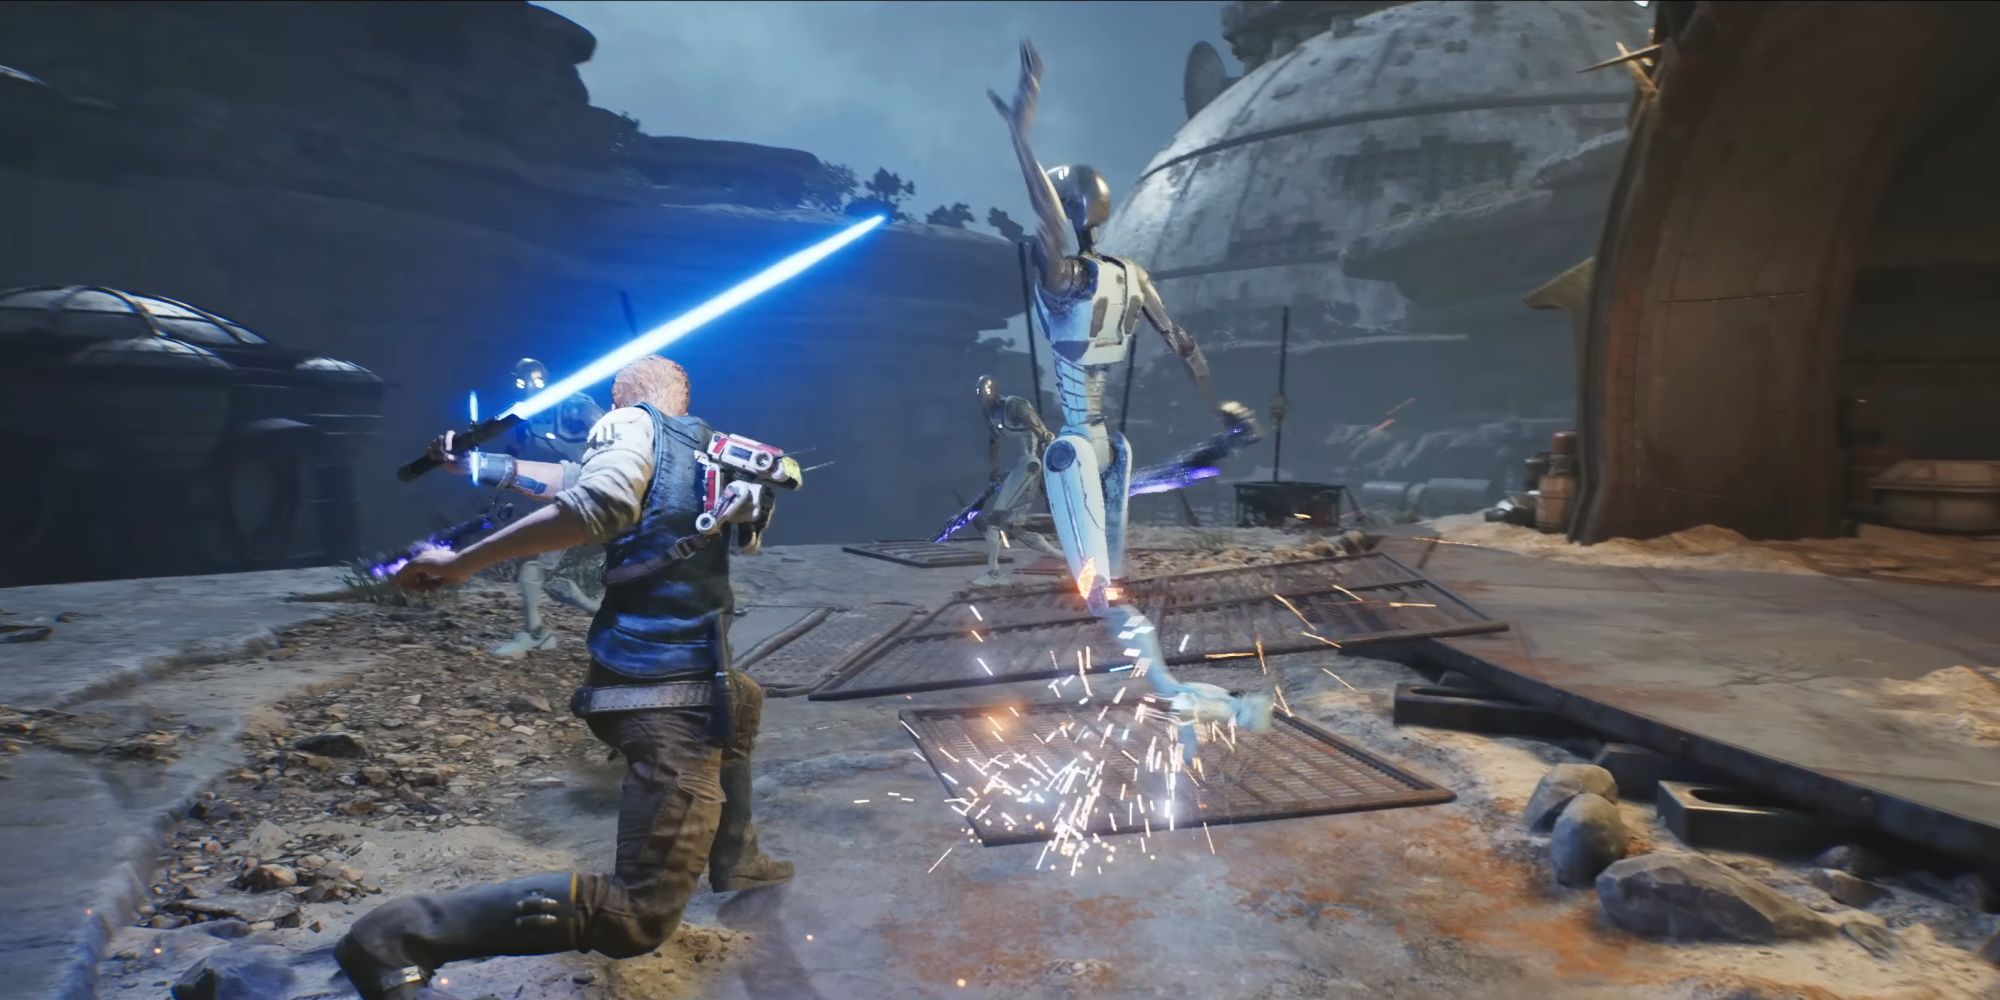 A screenshot of Star Wars Jedi: Survivor's gameplay trailer, with Cal having just sliced through the legs of a Commando Droid with his lightsaber.